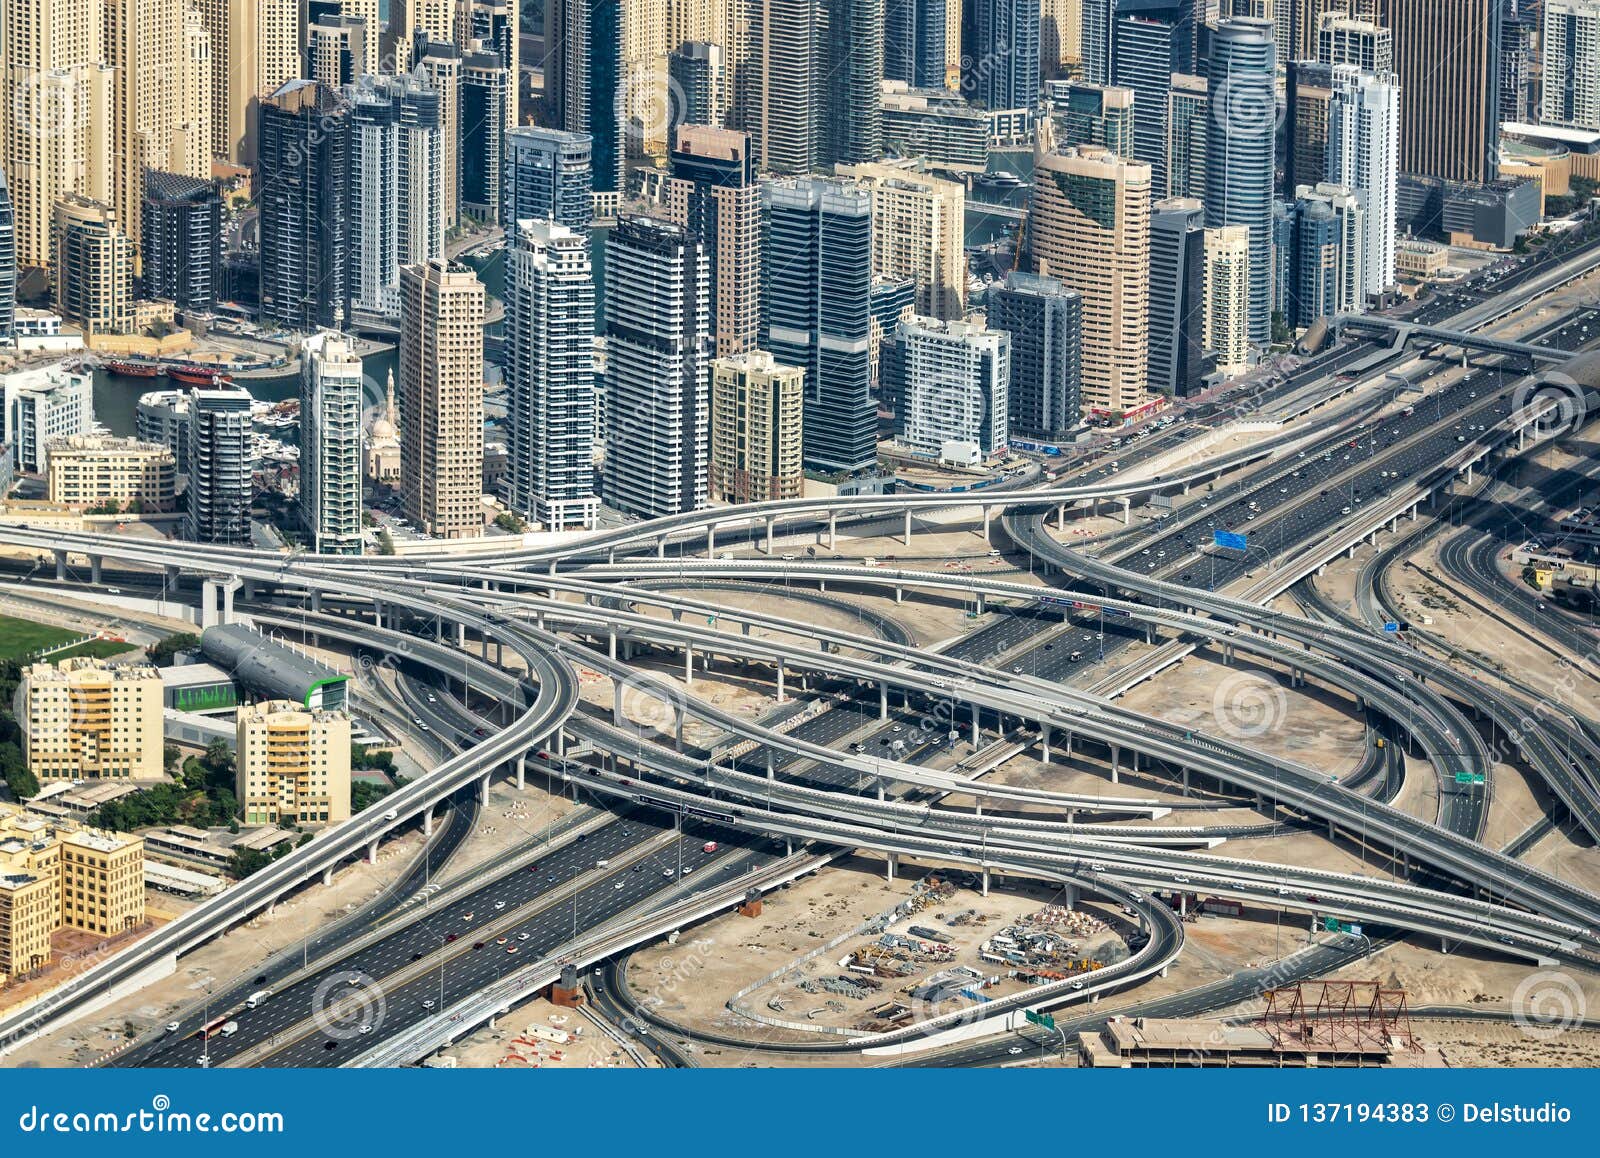 aerial view of sheikh zayeg road interchange and buidings, united arab emirates